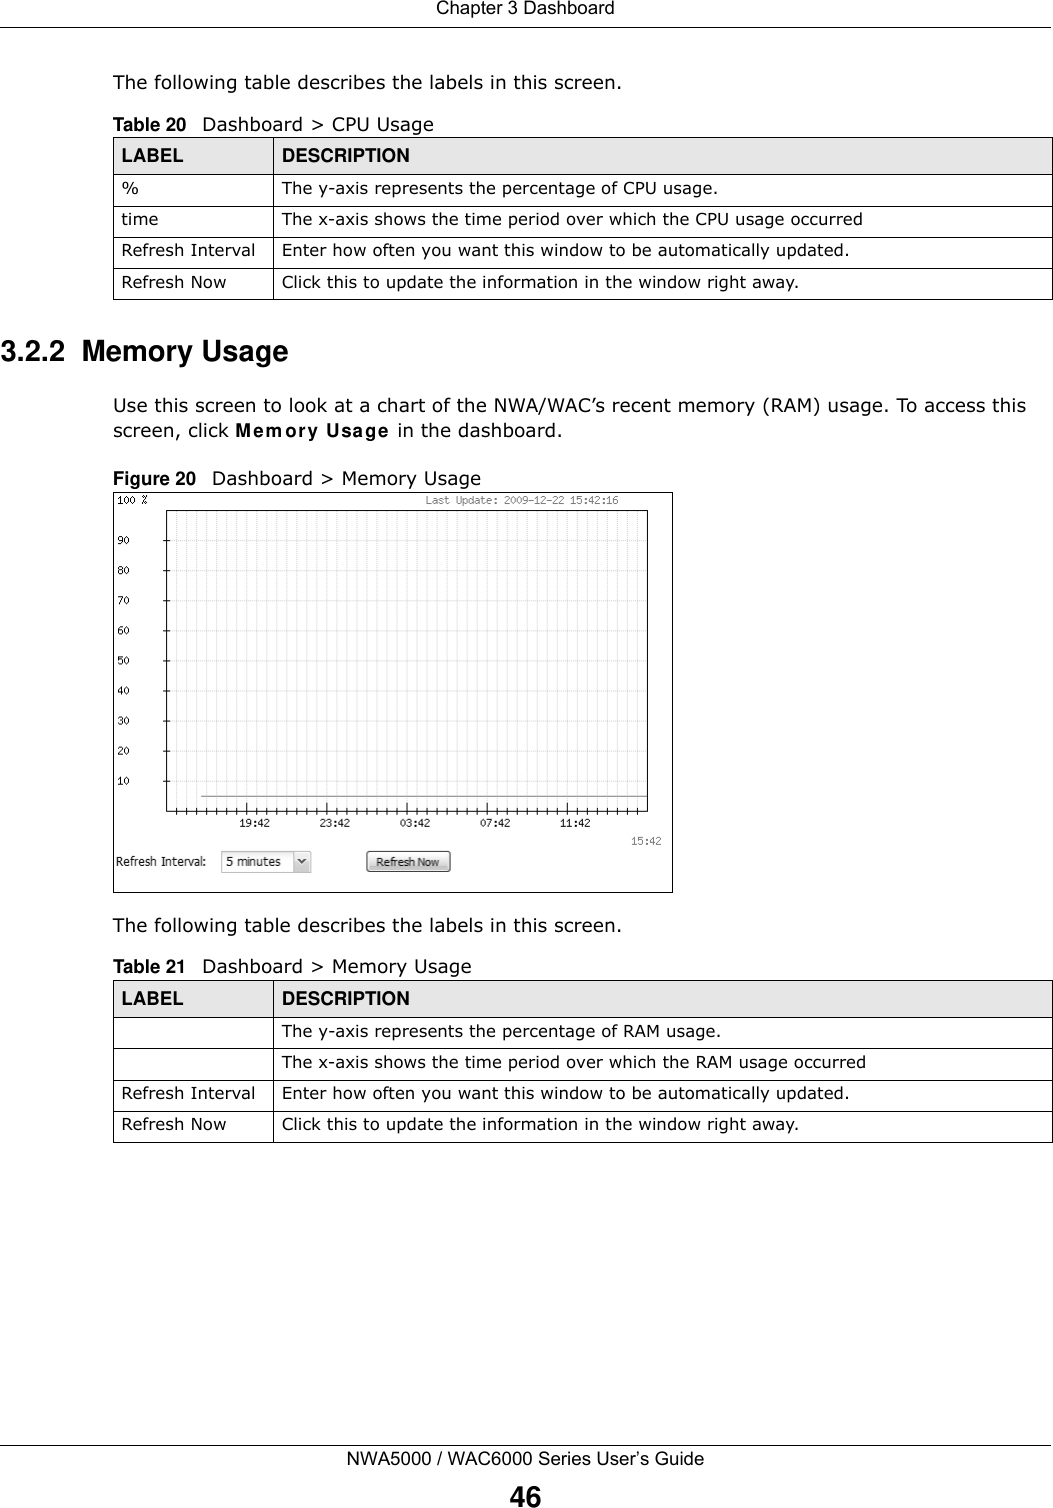 Chapter 3 DashboardNWA5000 / WAC6000 Series User’s Guide46The following table describes the labels in this screen.  3.2.2  Memory UsageUse this screen to look at a chart of the NWA/WAC’s recent memory (RAM) usage. To access this screen, click Memory Usage in the dashboard.Figure 20   Dashboard &gt; Memory UsageThe following table describes the labels in this screen.  Table 20   Dashboard &gt; CPU UsageLABEL DESCRIPTION% The y-axis represents the percentage of CPU usage.time The x-axis shows the time period over which the CPU usage occurredRefresh Interval Enter how often you want this window to be automatically updated.Refresh Now Click this to update the information in the window right away. Table 21   Dashboard &gt; Memory UsageLABEL DESCRIPTIONThe y-axis represents the percentage of RAM usage.The x-axis shows the time period over which the RAM usage occurredRefresh Interval Enter how often you want this window to be automatically updated.Refresh Now Click this to update the information in the window right away. 